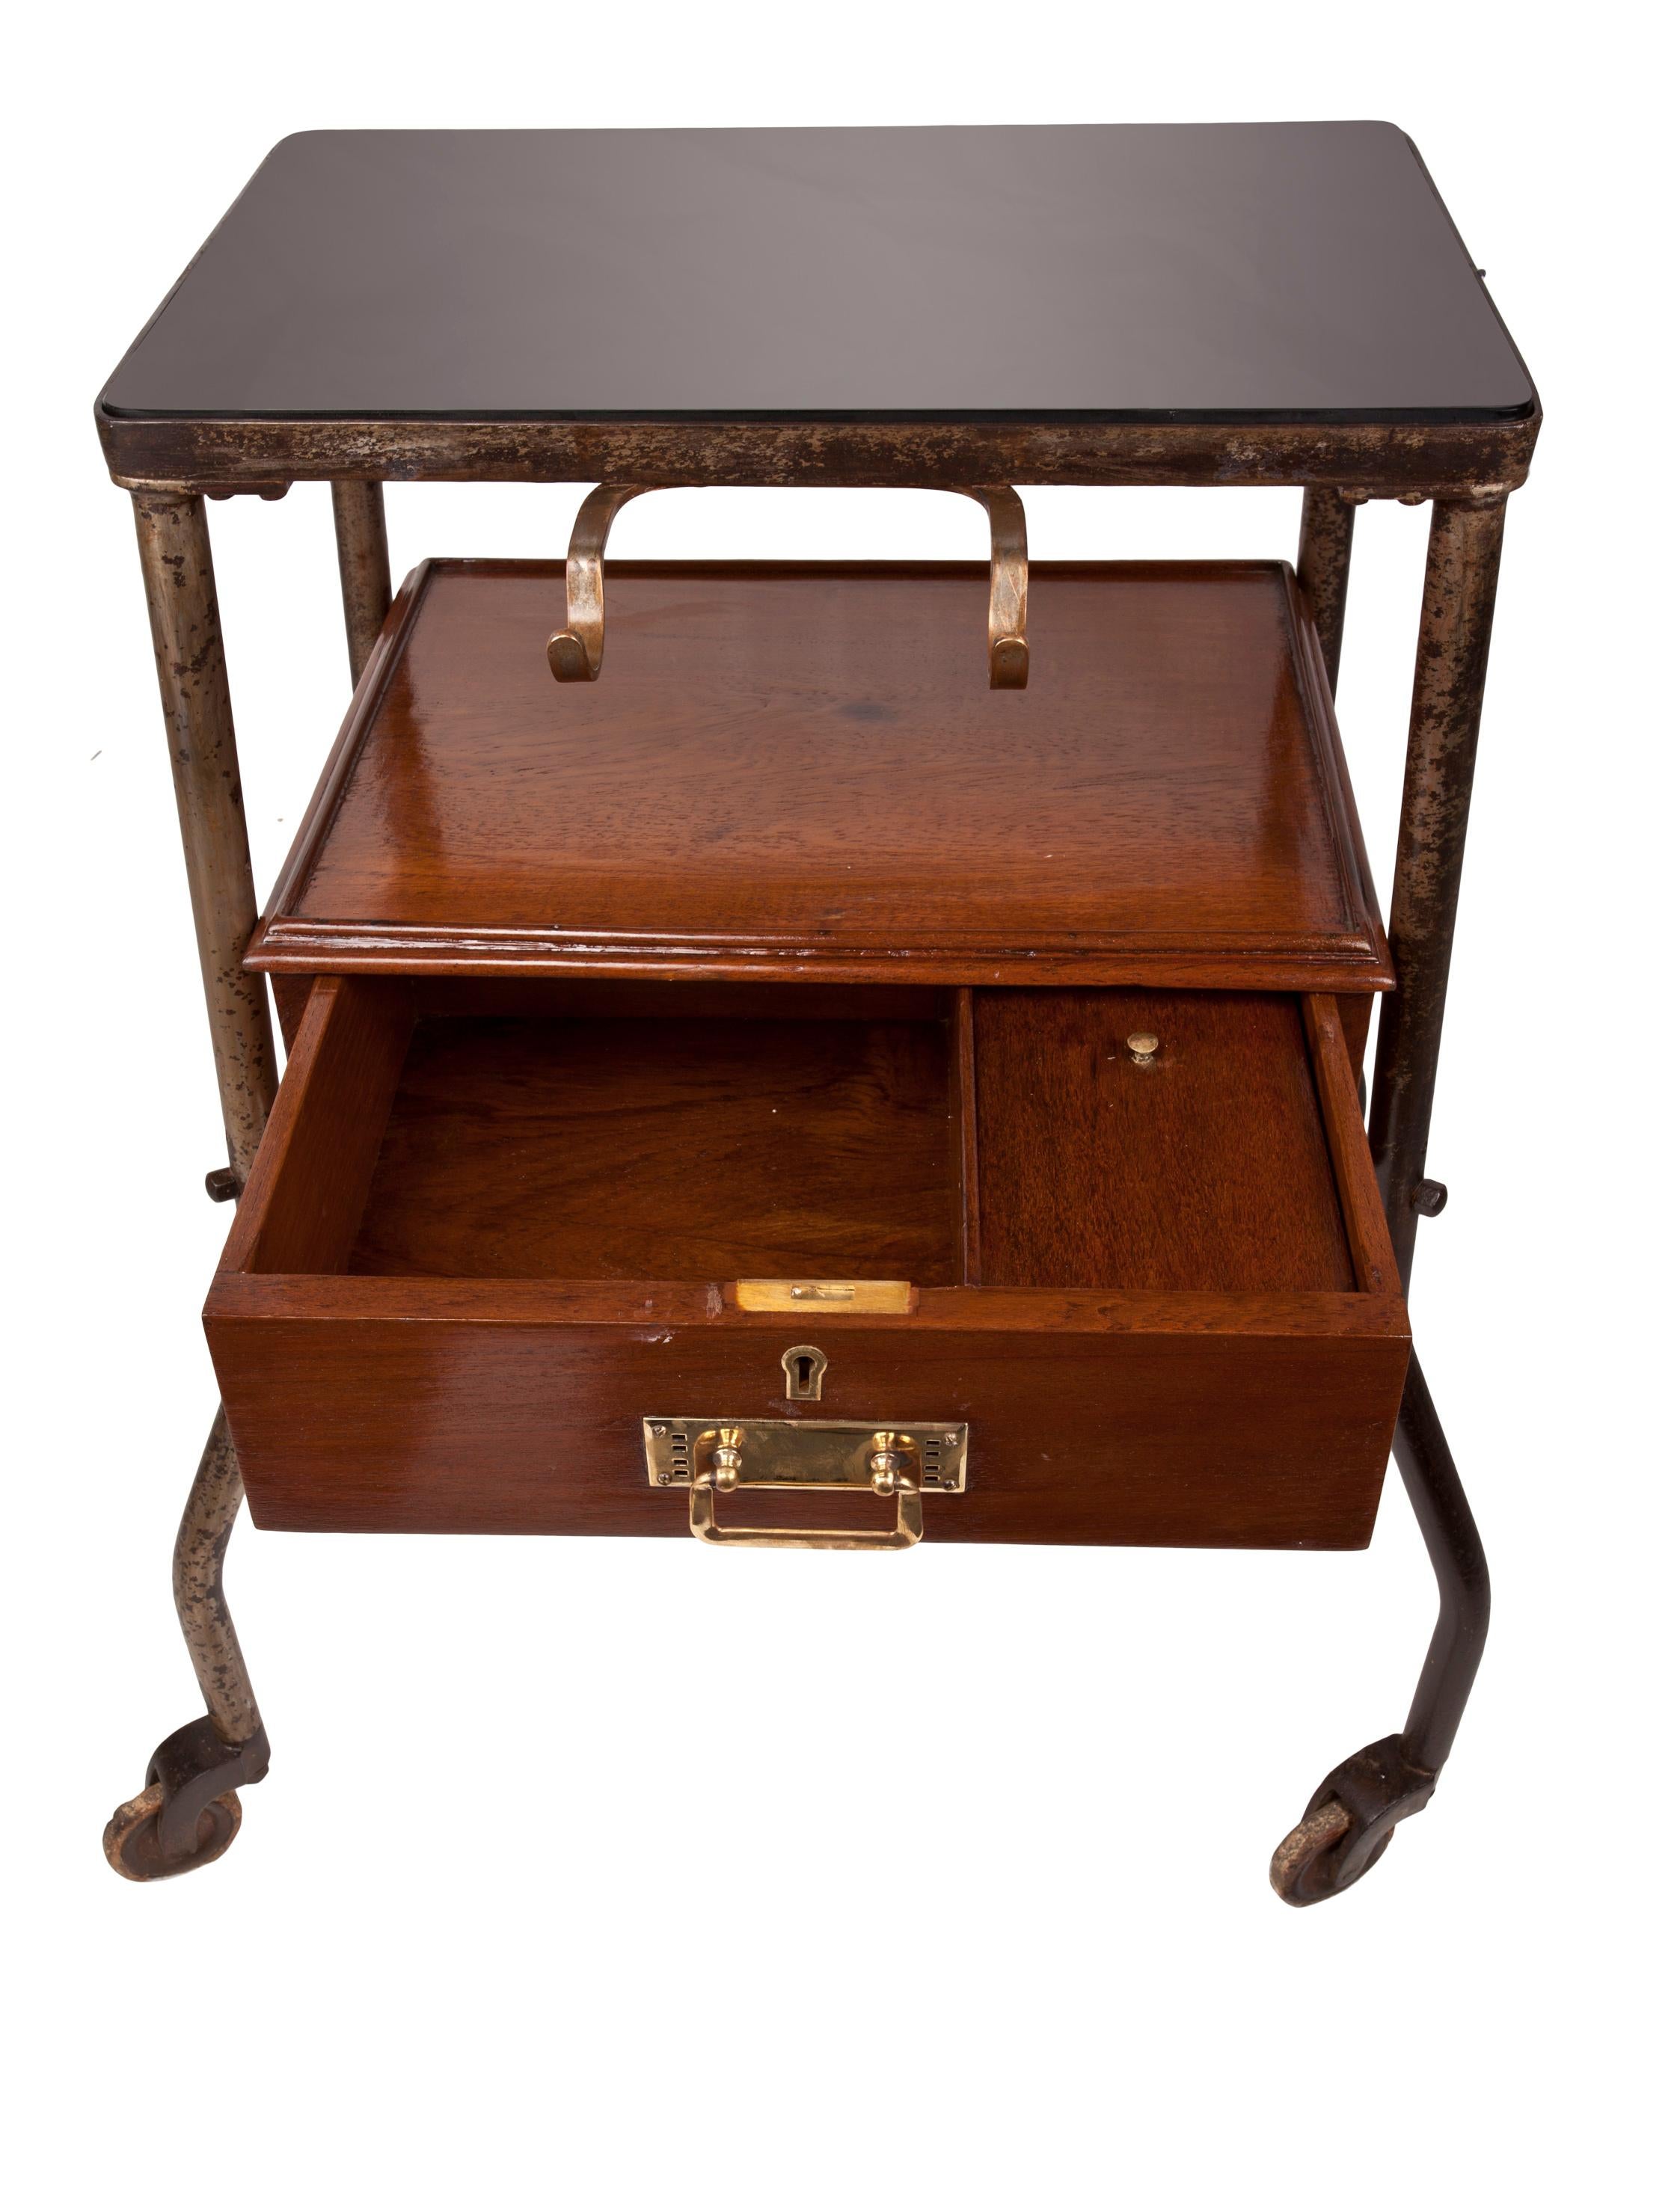 From a decommissioned ship, a teak medial trolley with smoked black glass top, front drawer and brass drawer pull and brass instrument holders in the front. Iron legs with the original iron wheels. 7 inches between the two levels. Great as a small